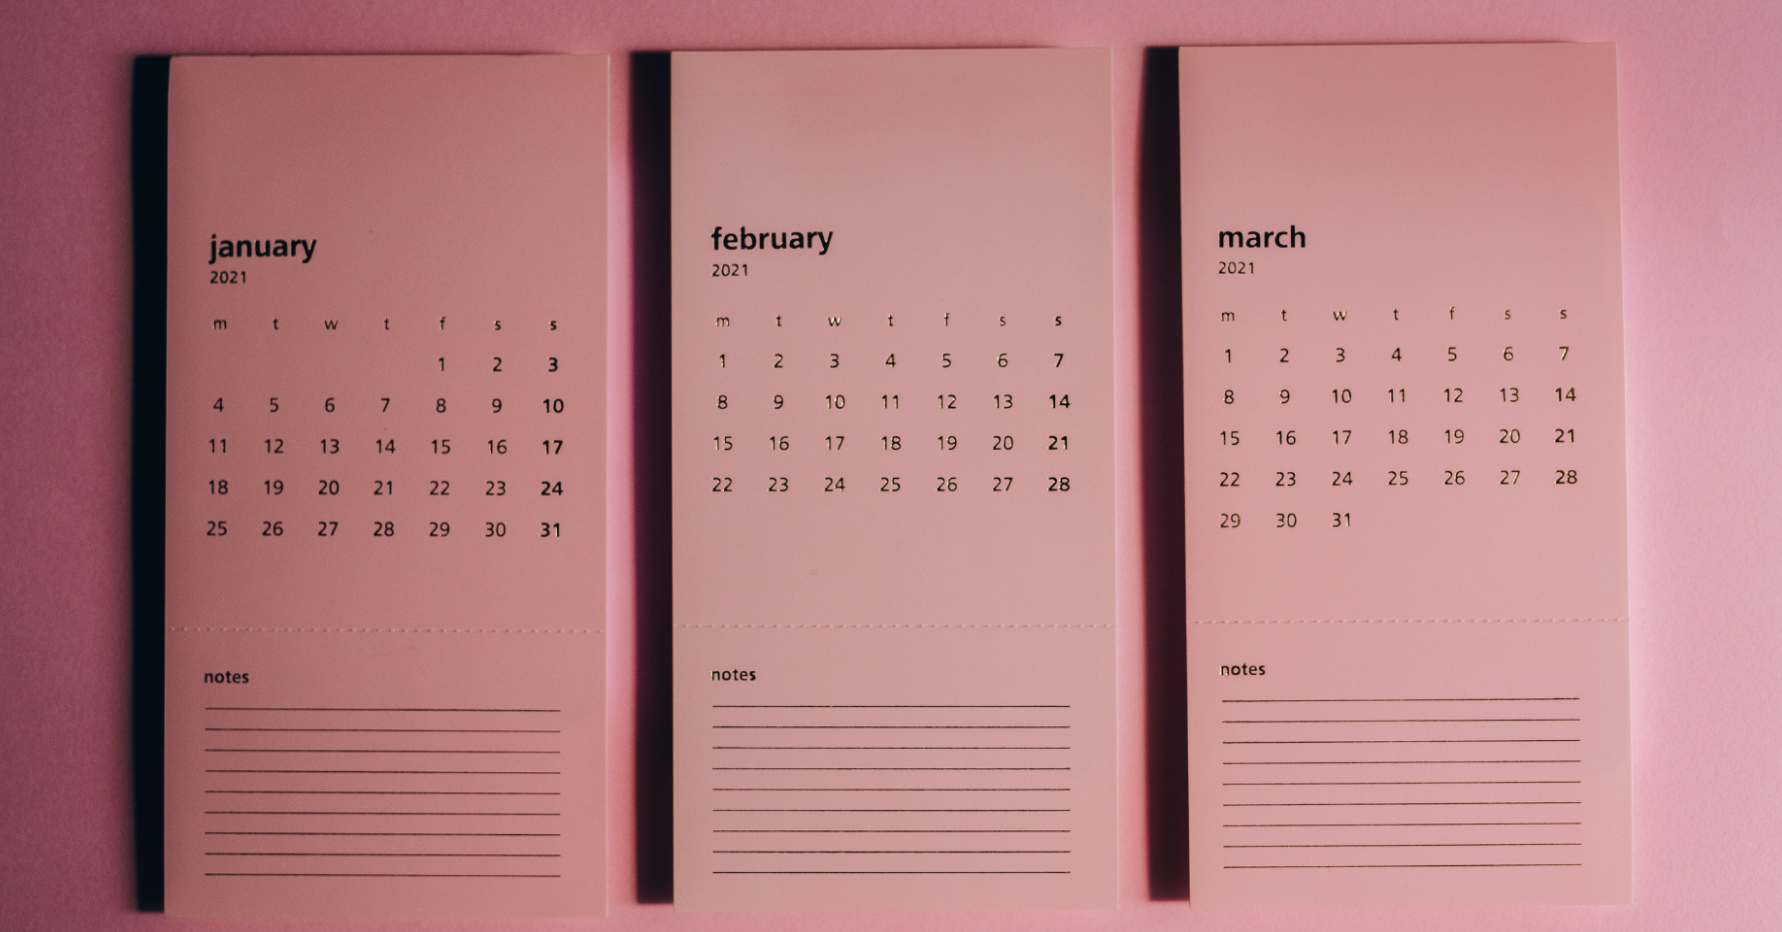 Three monthly calendars: January, February, and March for the year 2021